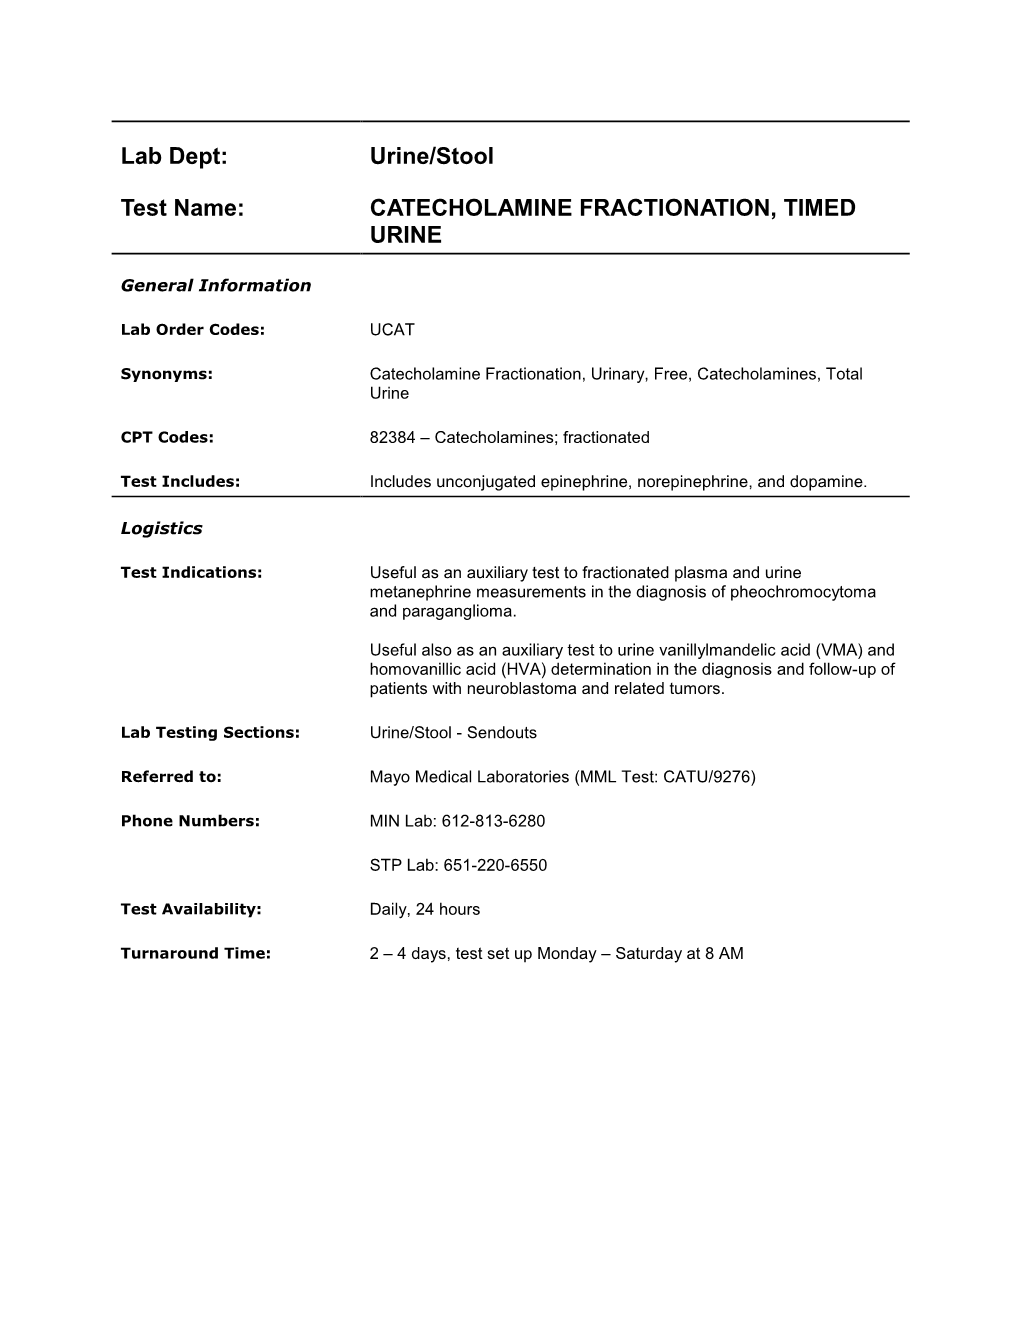 Catecholamine Fractionation, Timed Urine